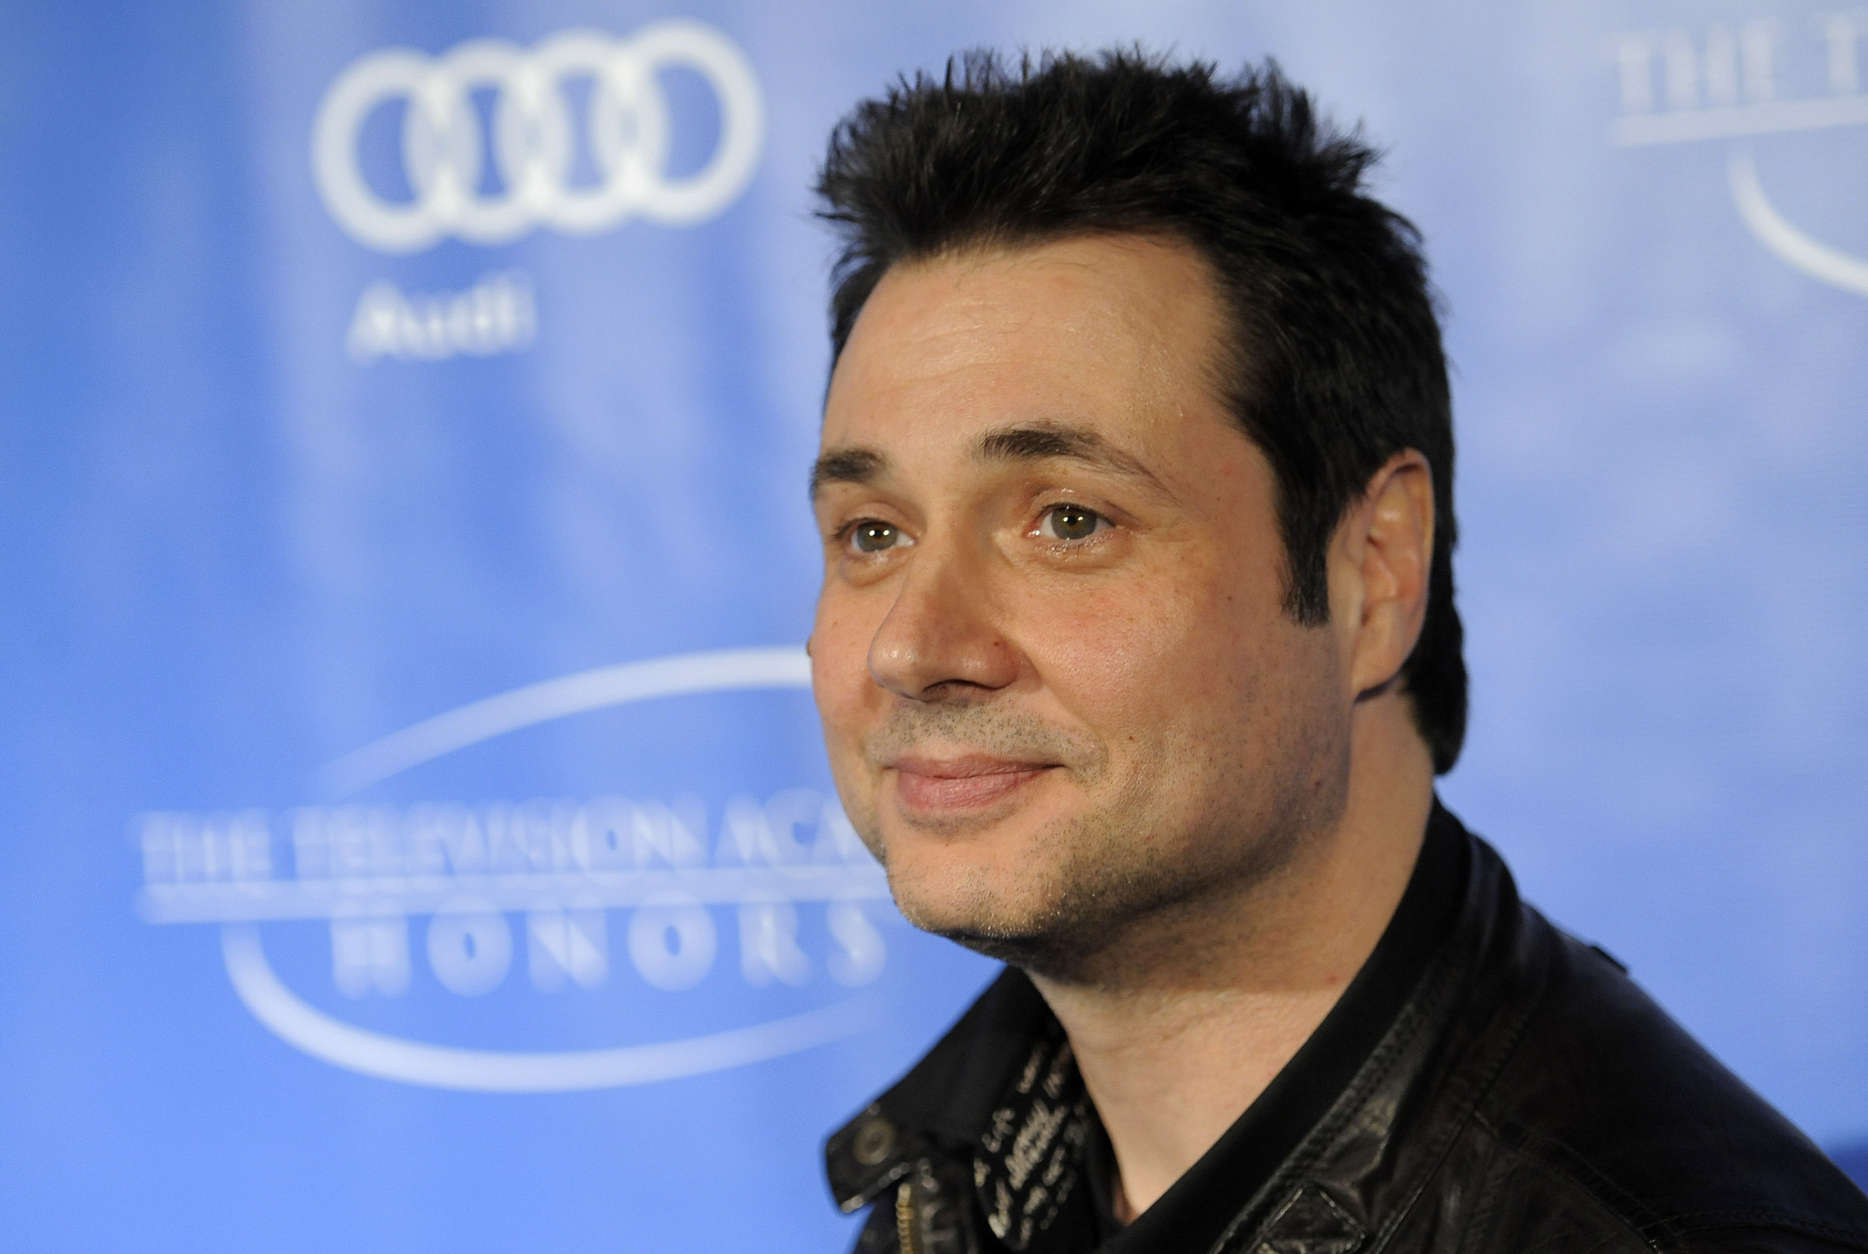 Actor Adam Ferrara poses at the Fifth Television Academy Honors ceremony, Wednesday, May 2, 2012, in Beverly Hills, Calif. (AP Photo/Chris Pizzello)